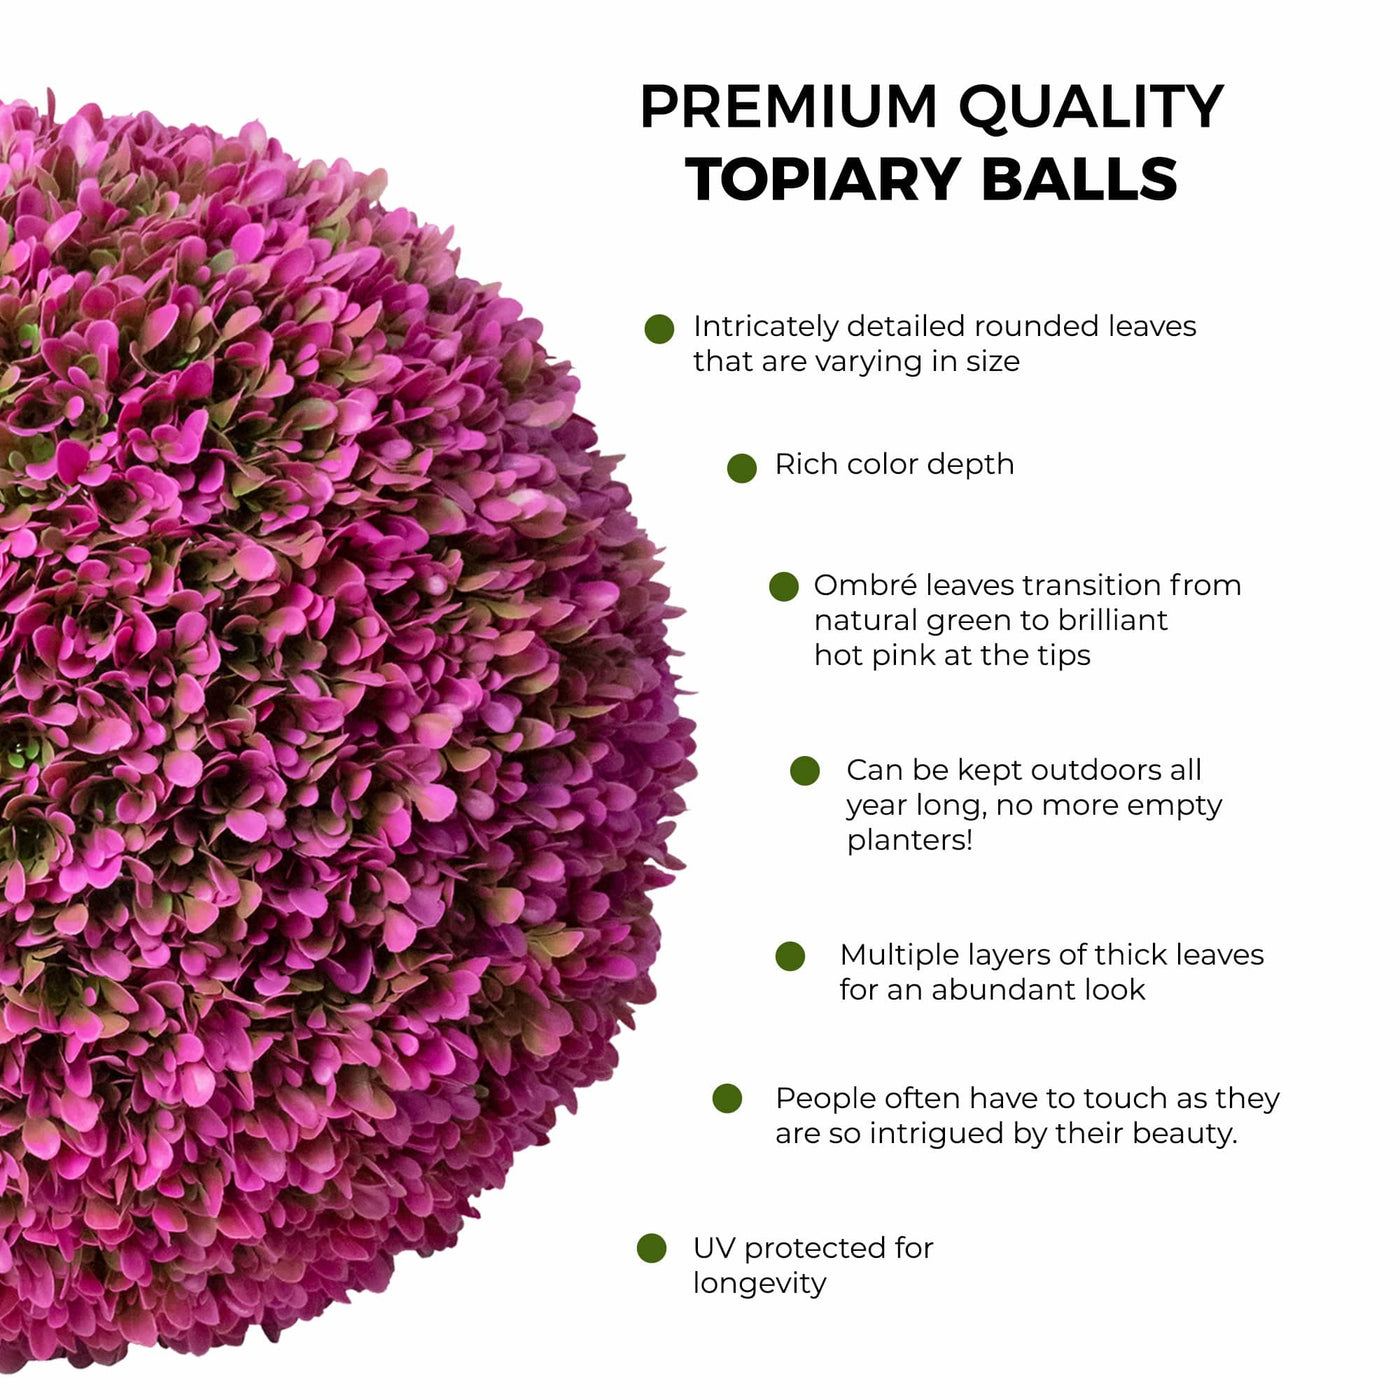 365 Curb Appeal Topiary ball 16" size large - Set of 2 Large Pink Topiary Balls